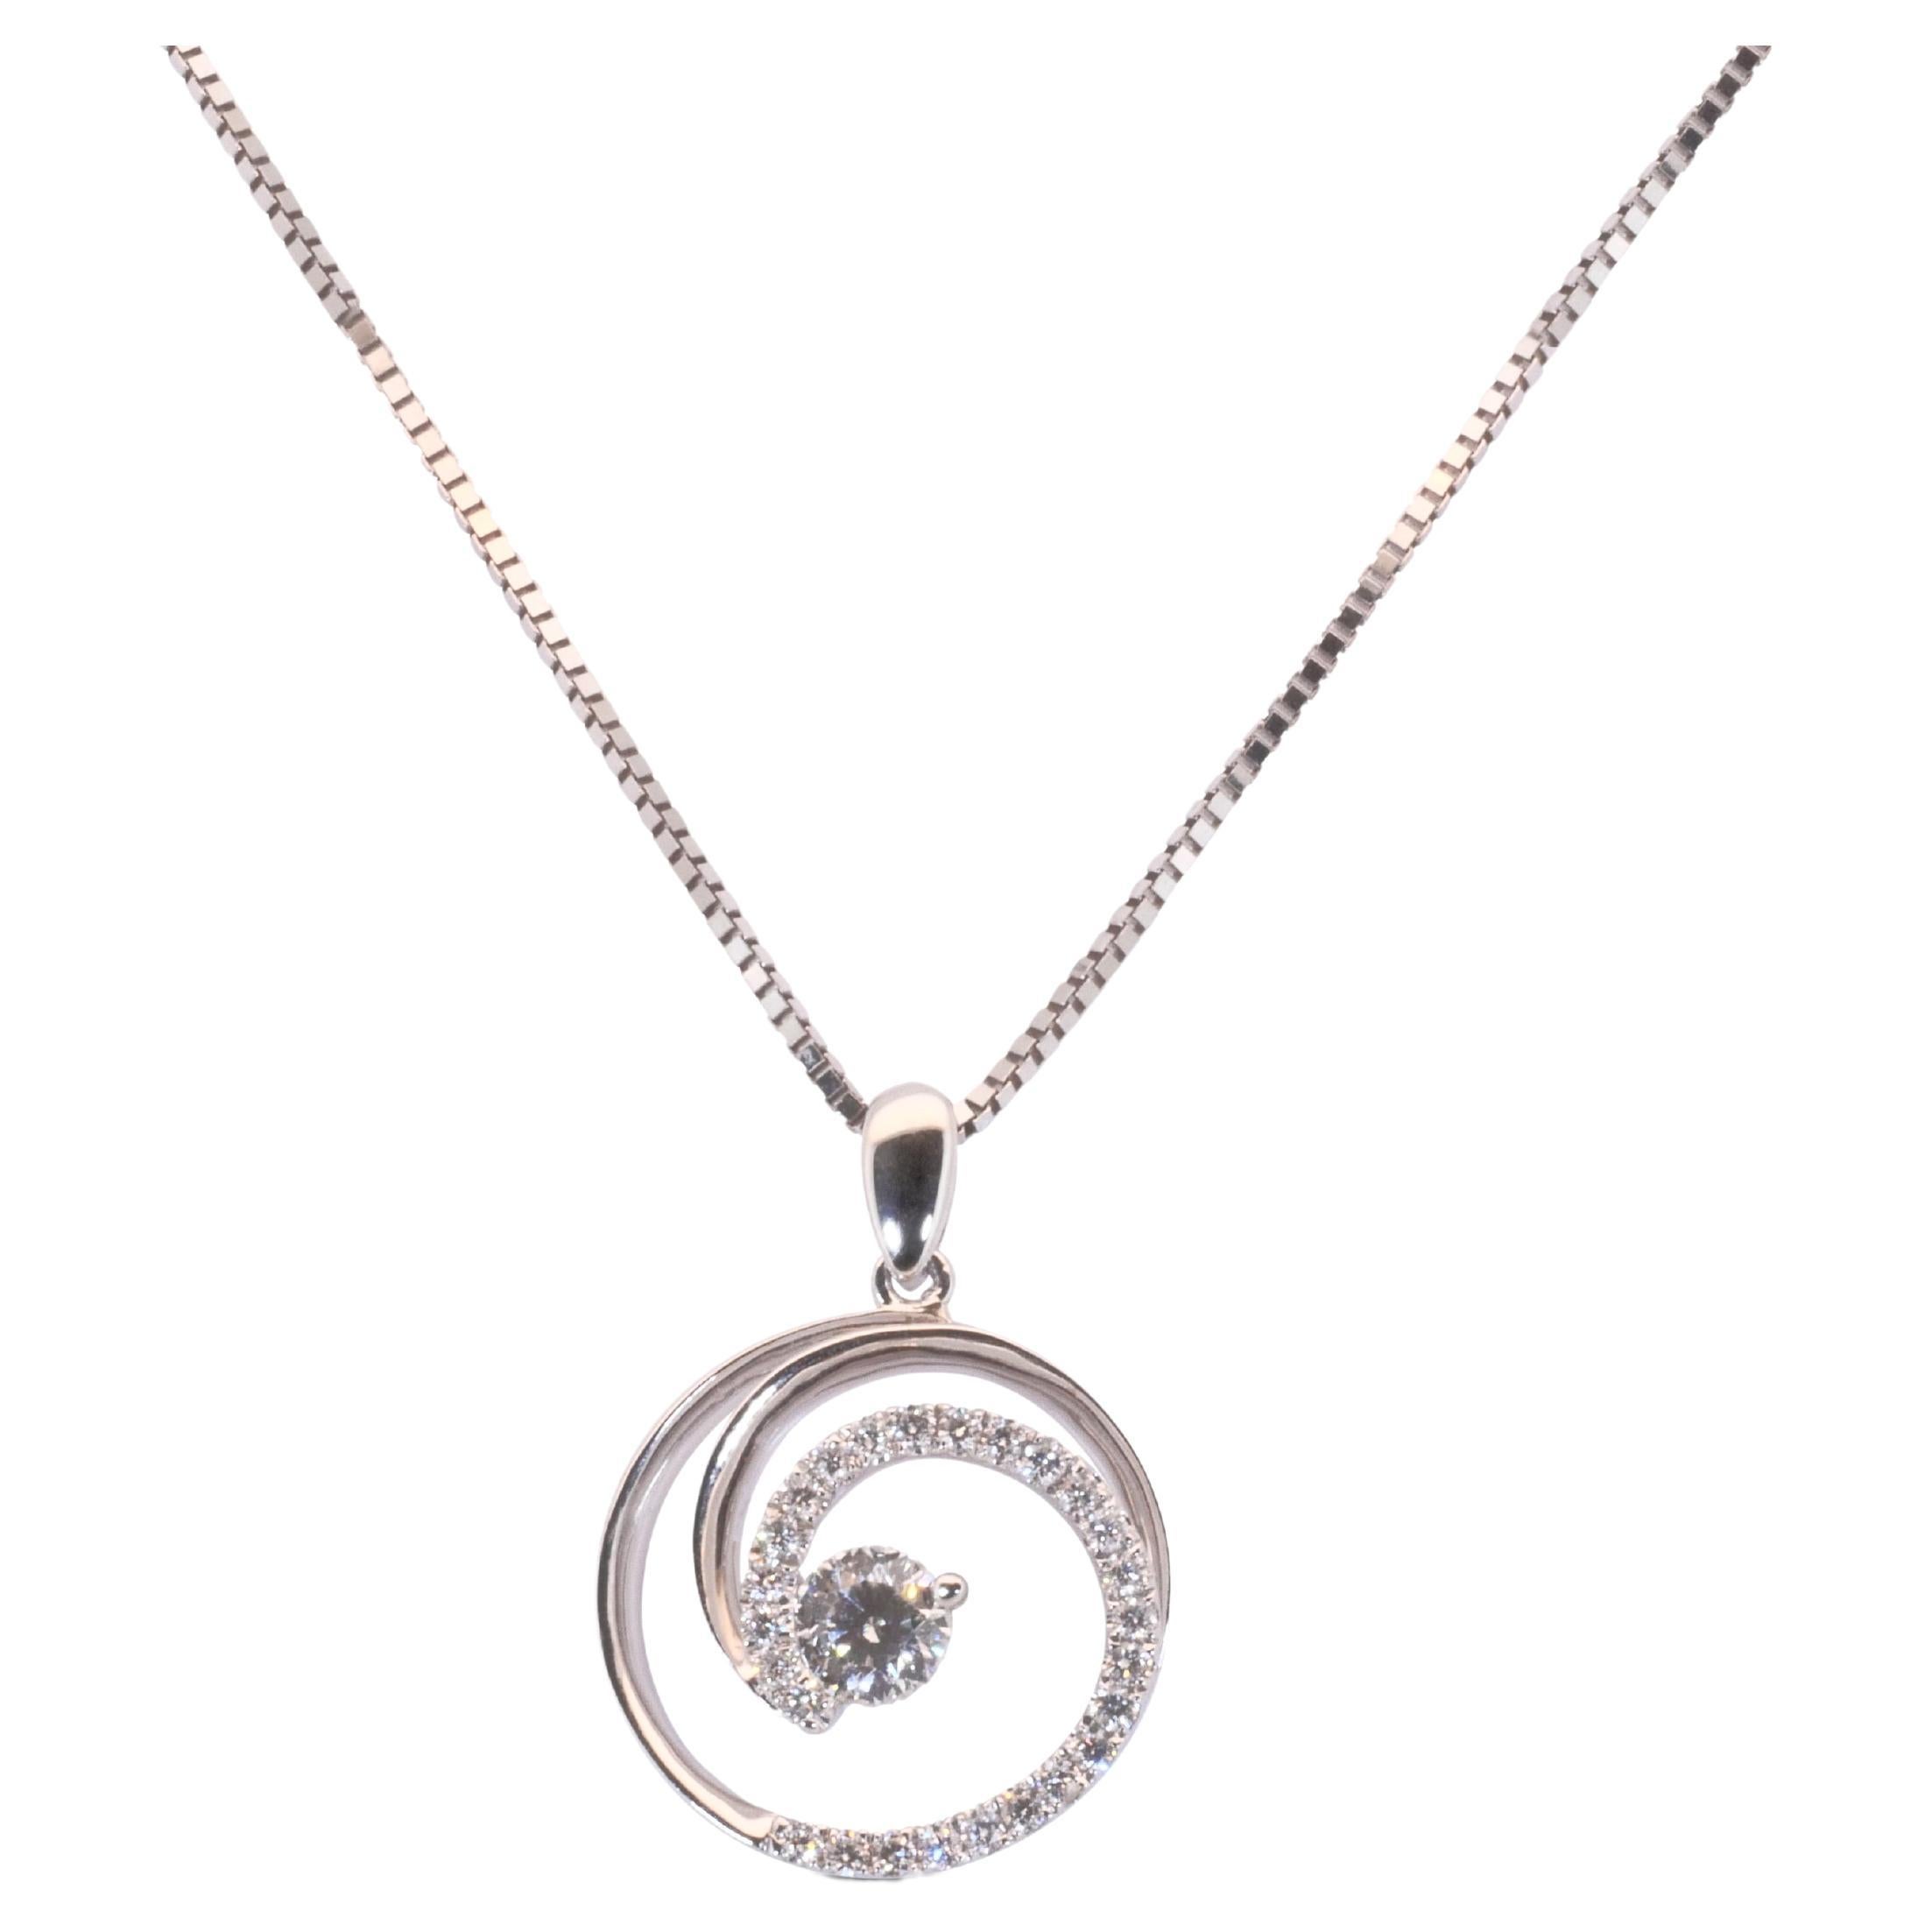 Gorgeous 18k White Gold Twirl Circle Necklace with 0.43ct Natural Diamonds